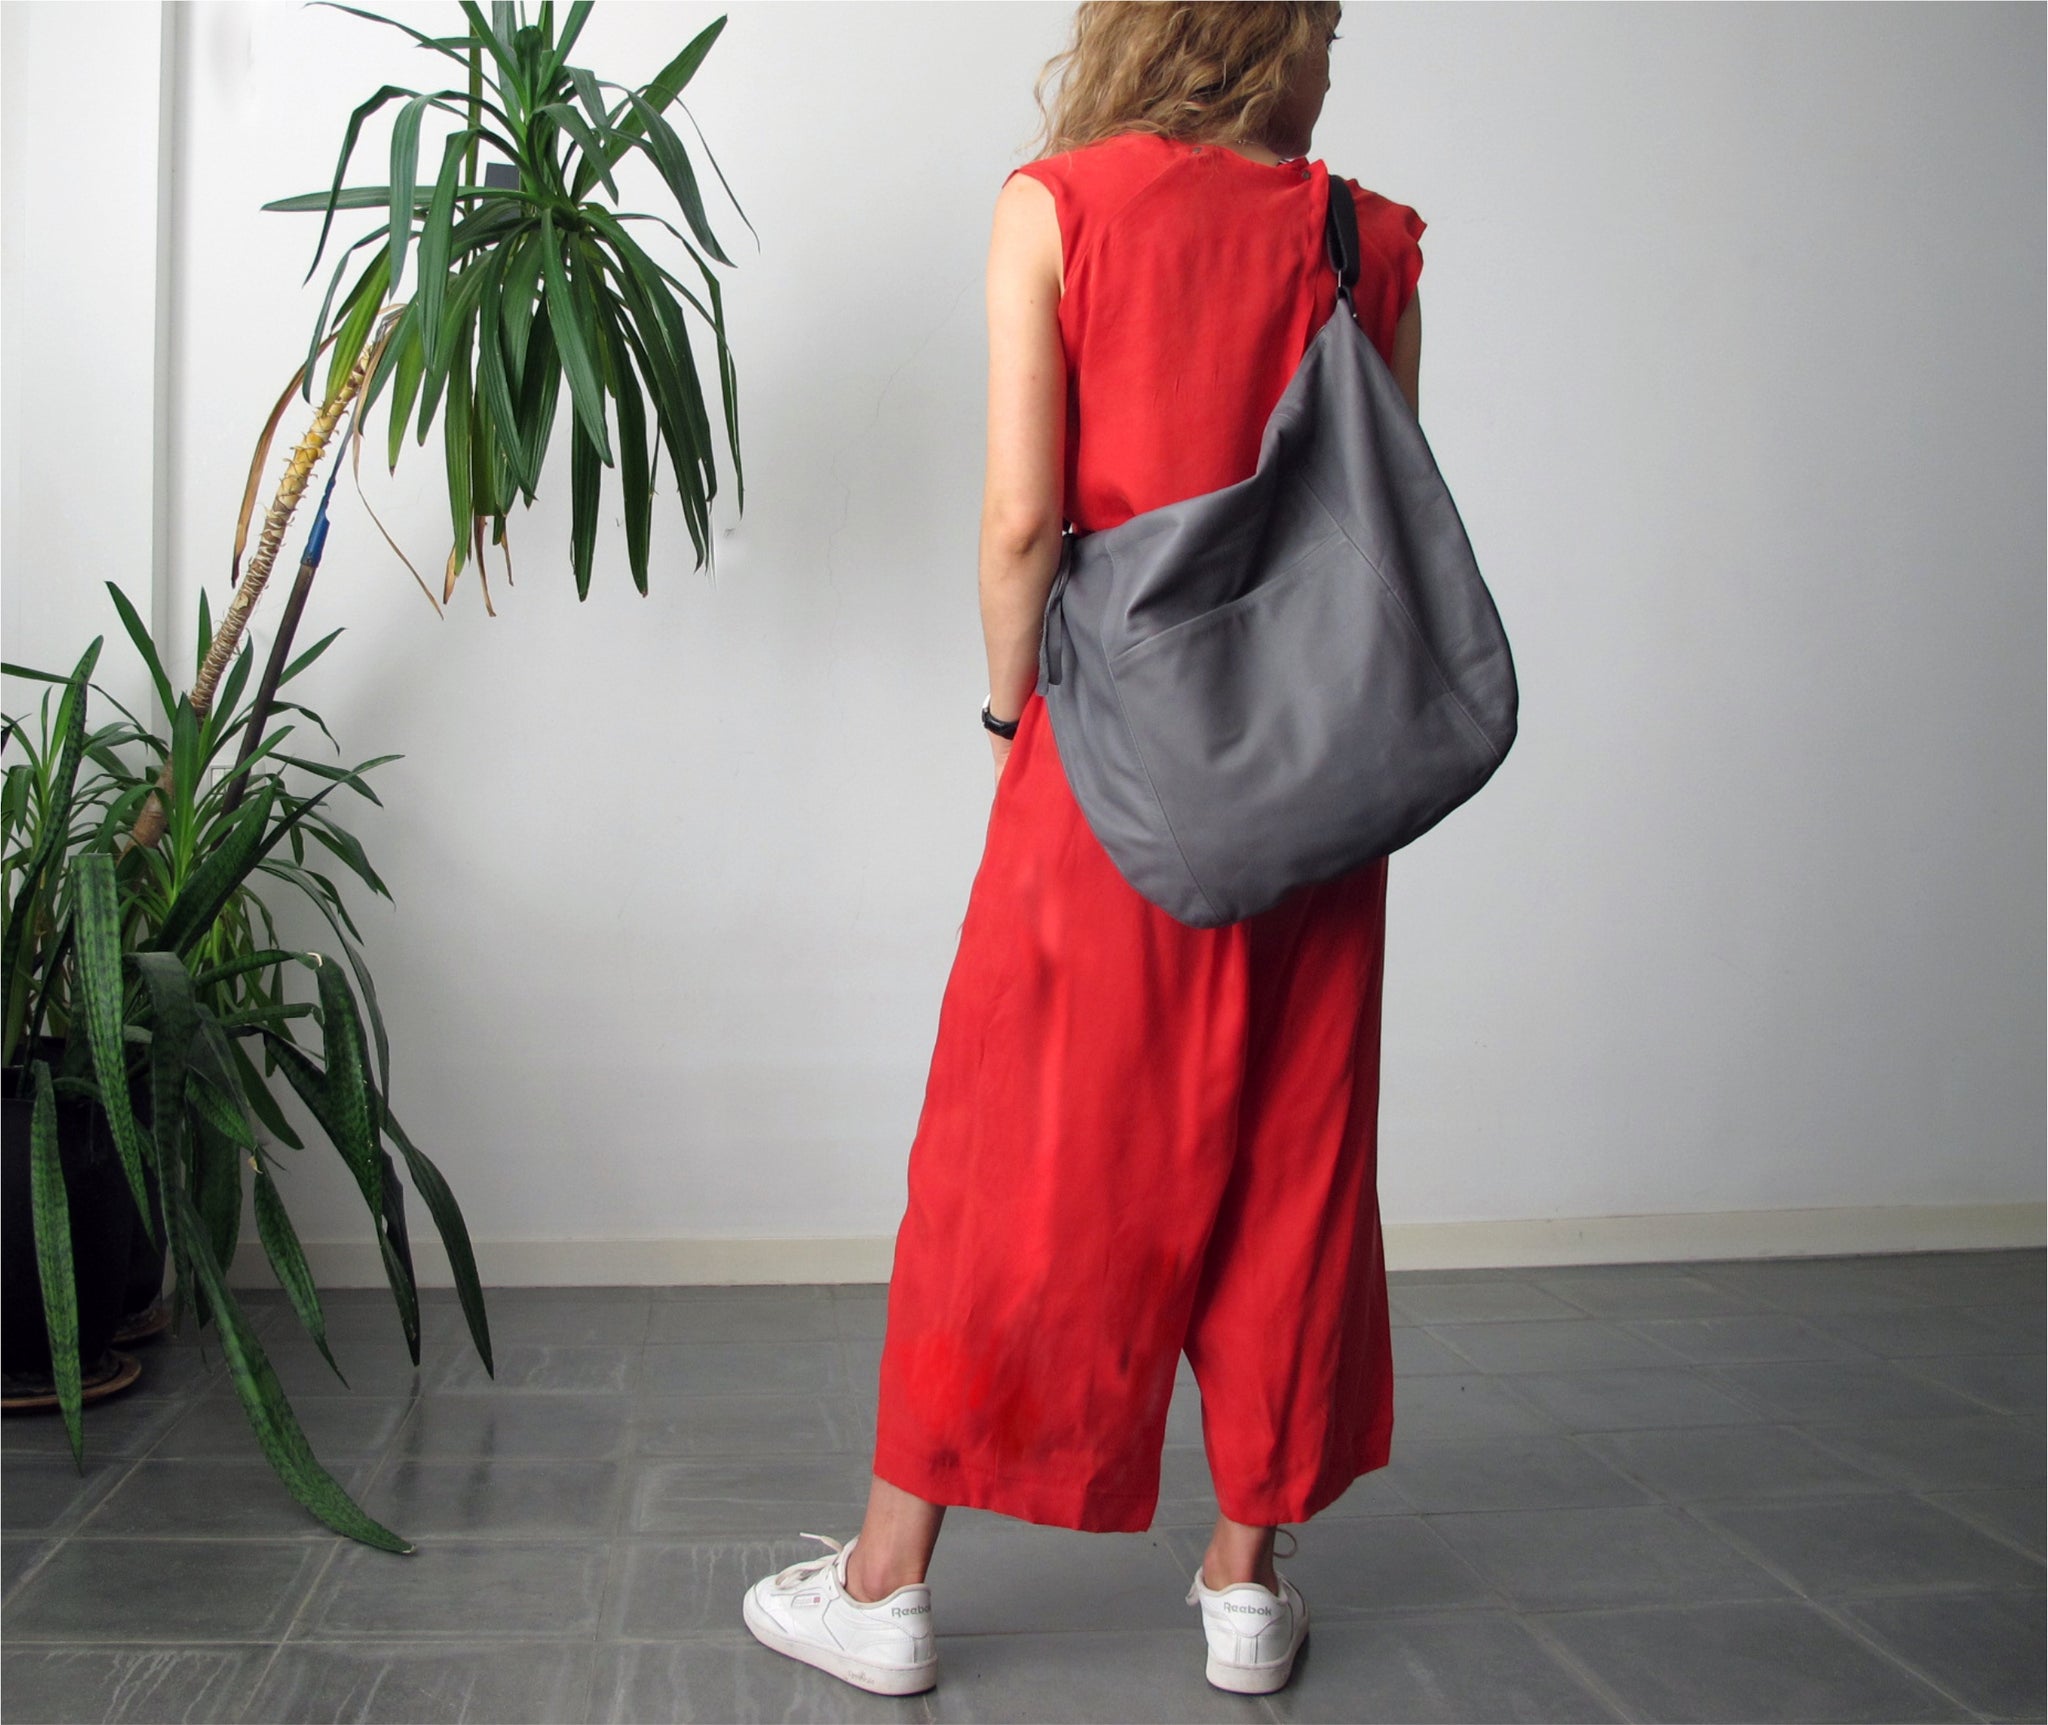 This leather hobo bag is handmade with soft premium quality Italian leather, featuring an adjustable sleek matte black leather shoulder strap that fits seamlessly with every outfit color & style. This large leather bag can be carried crossbody or on the shoulder, showing off it`s beautiful leather drop. Its ideal minimalist design is suitable for long active days & use.